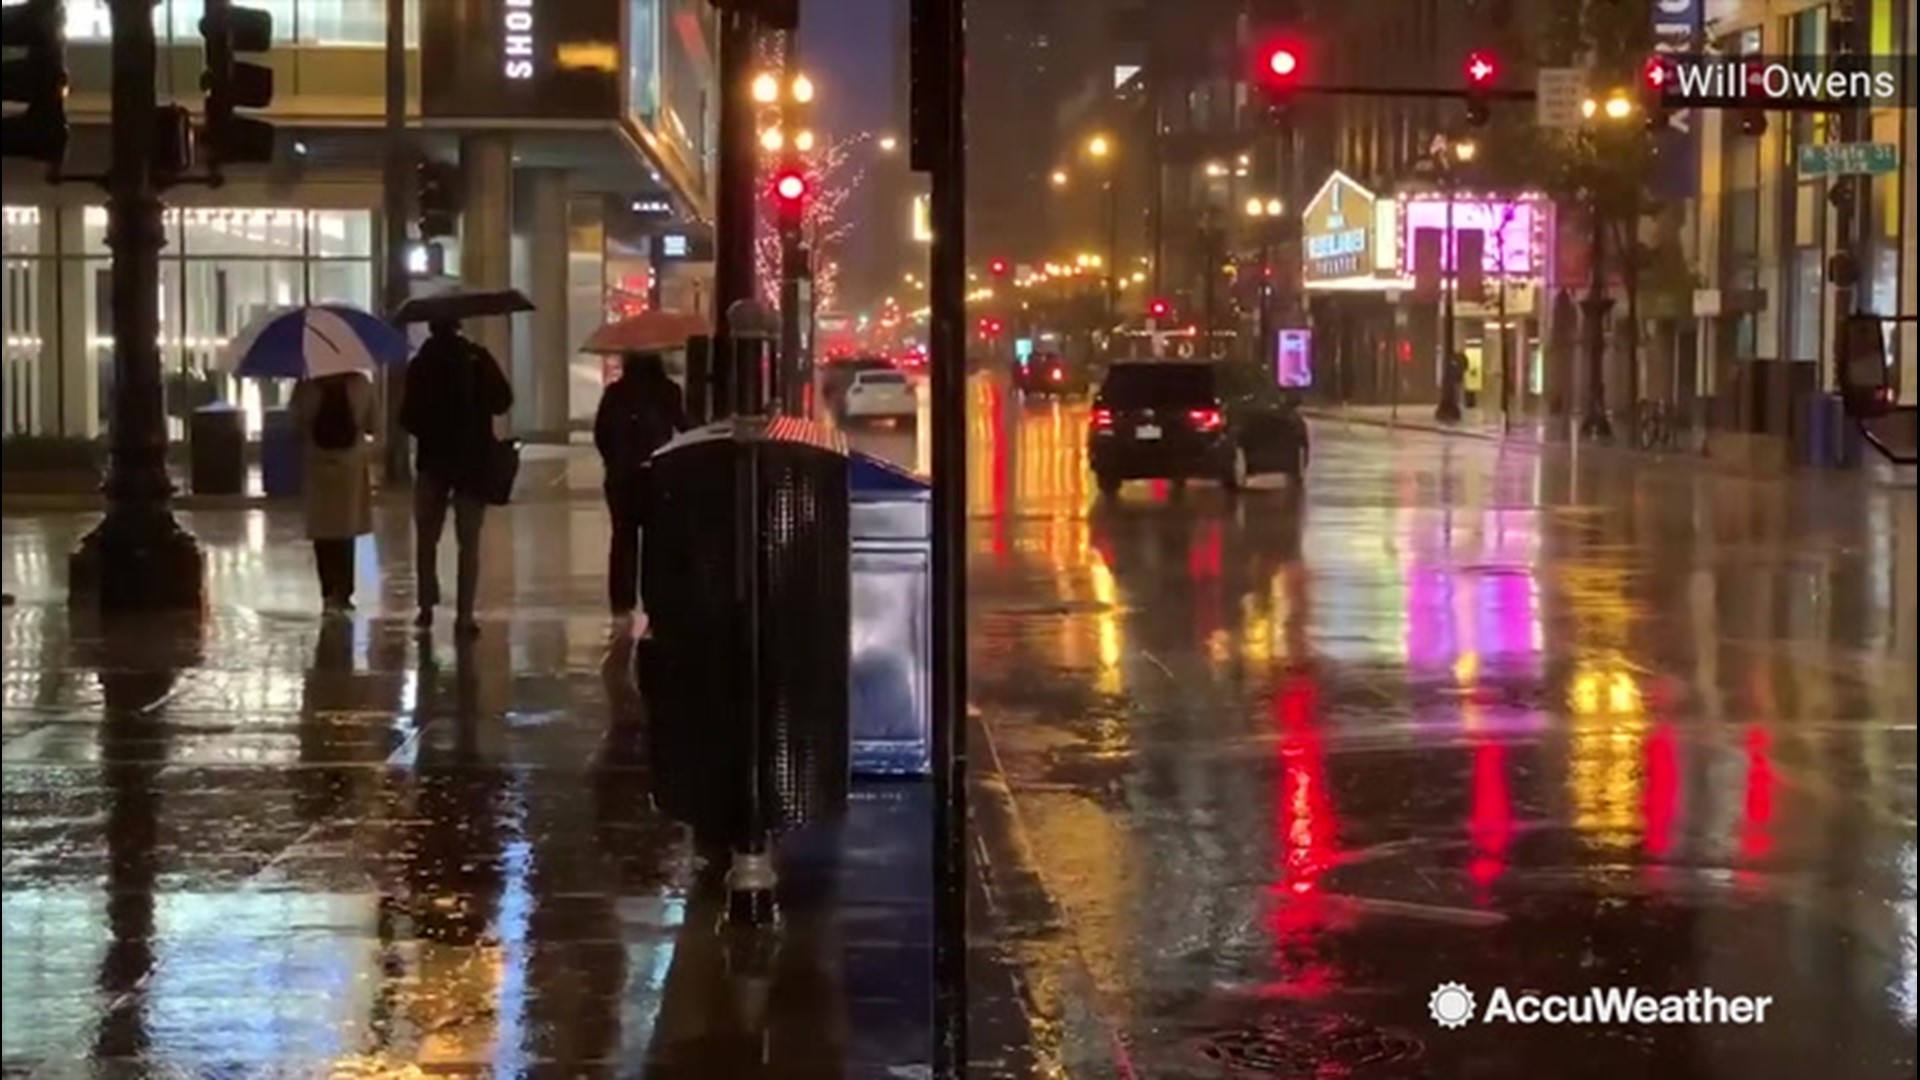 The morning commute was a bit wet for Chicagoans as rain poured down on Nov. 21.